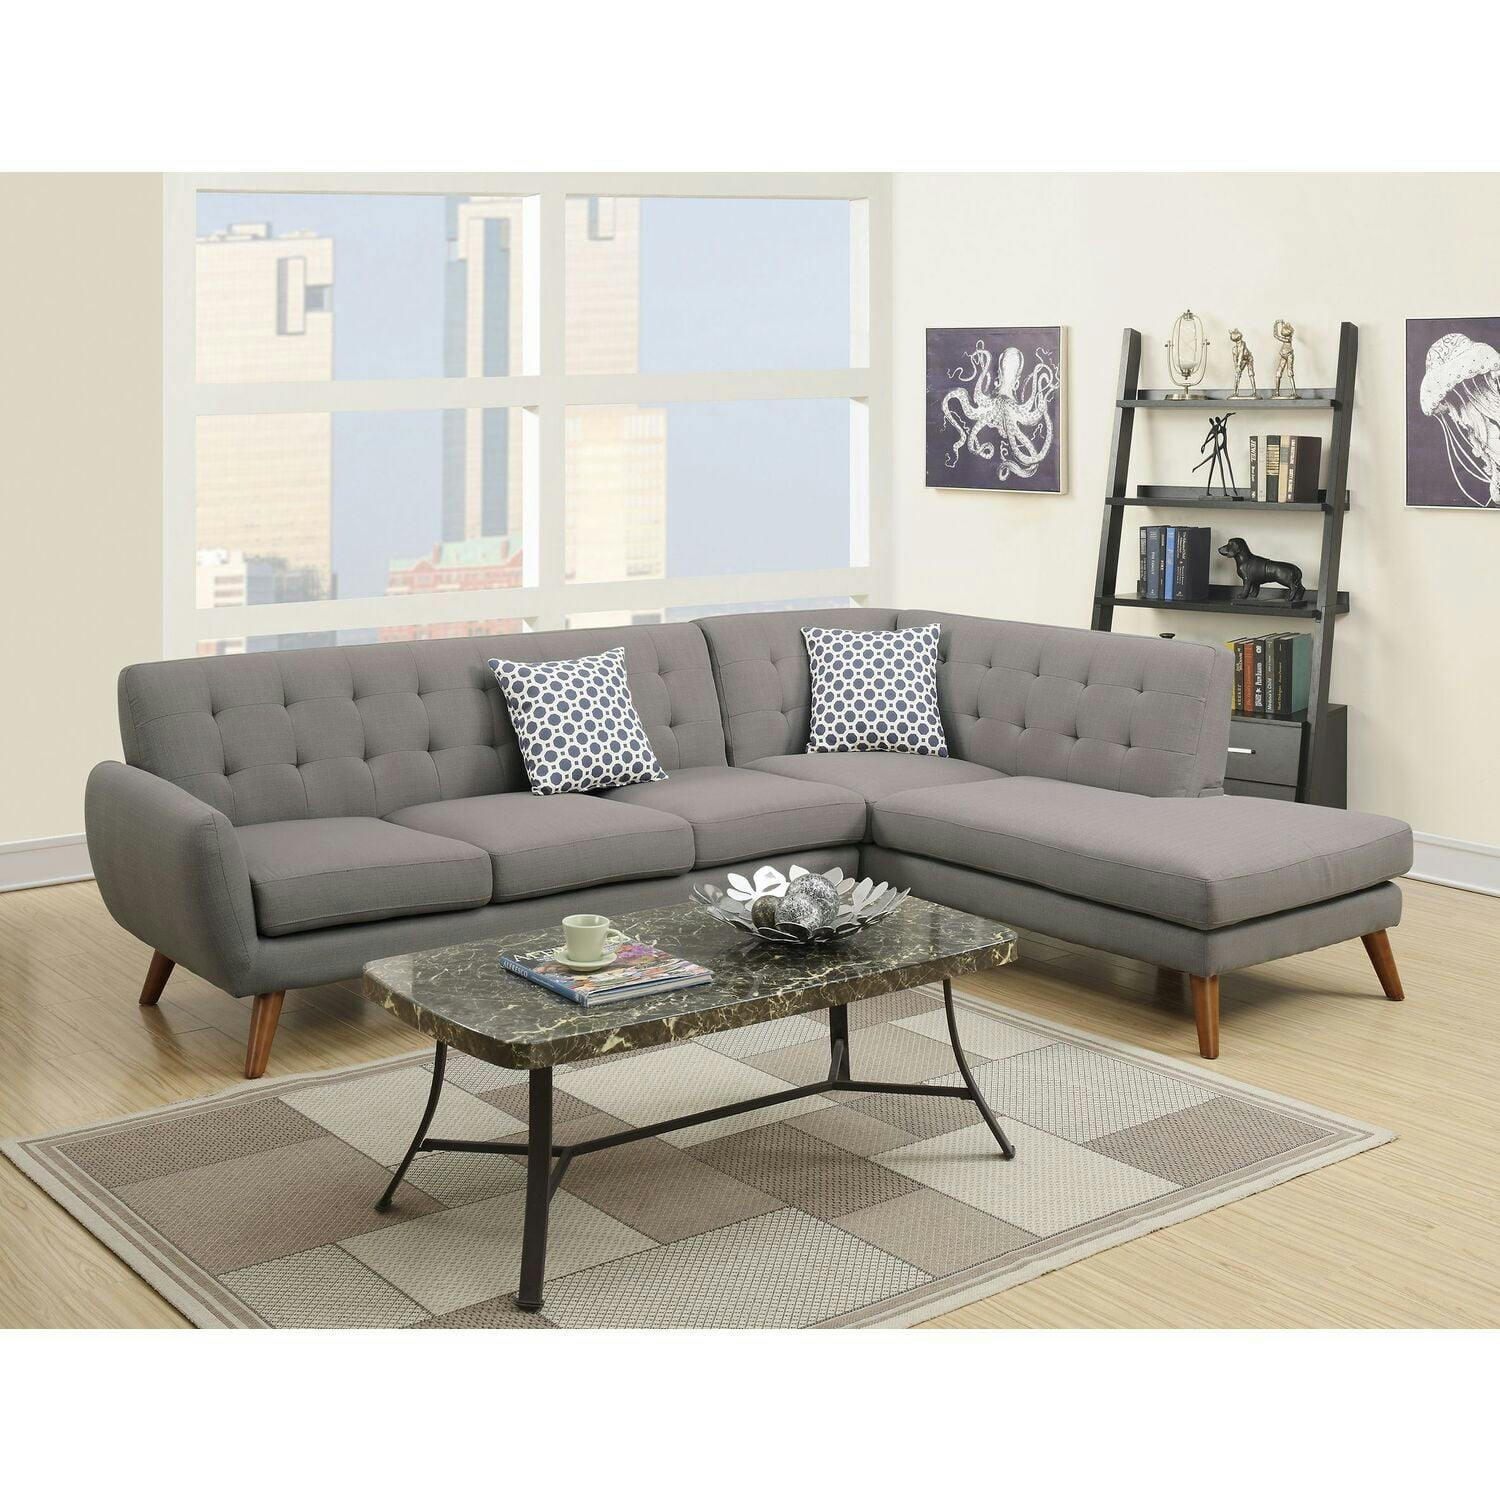 Mid-Century Modern Gray Fabric Sectional Sofa Set with Tufted Back